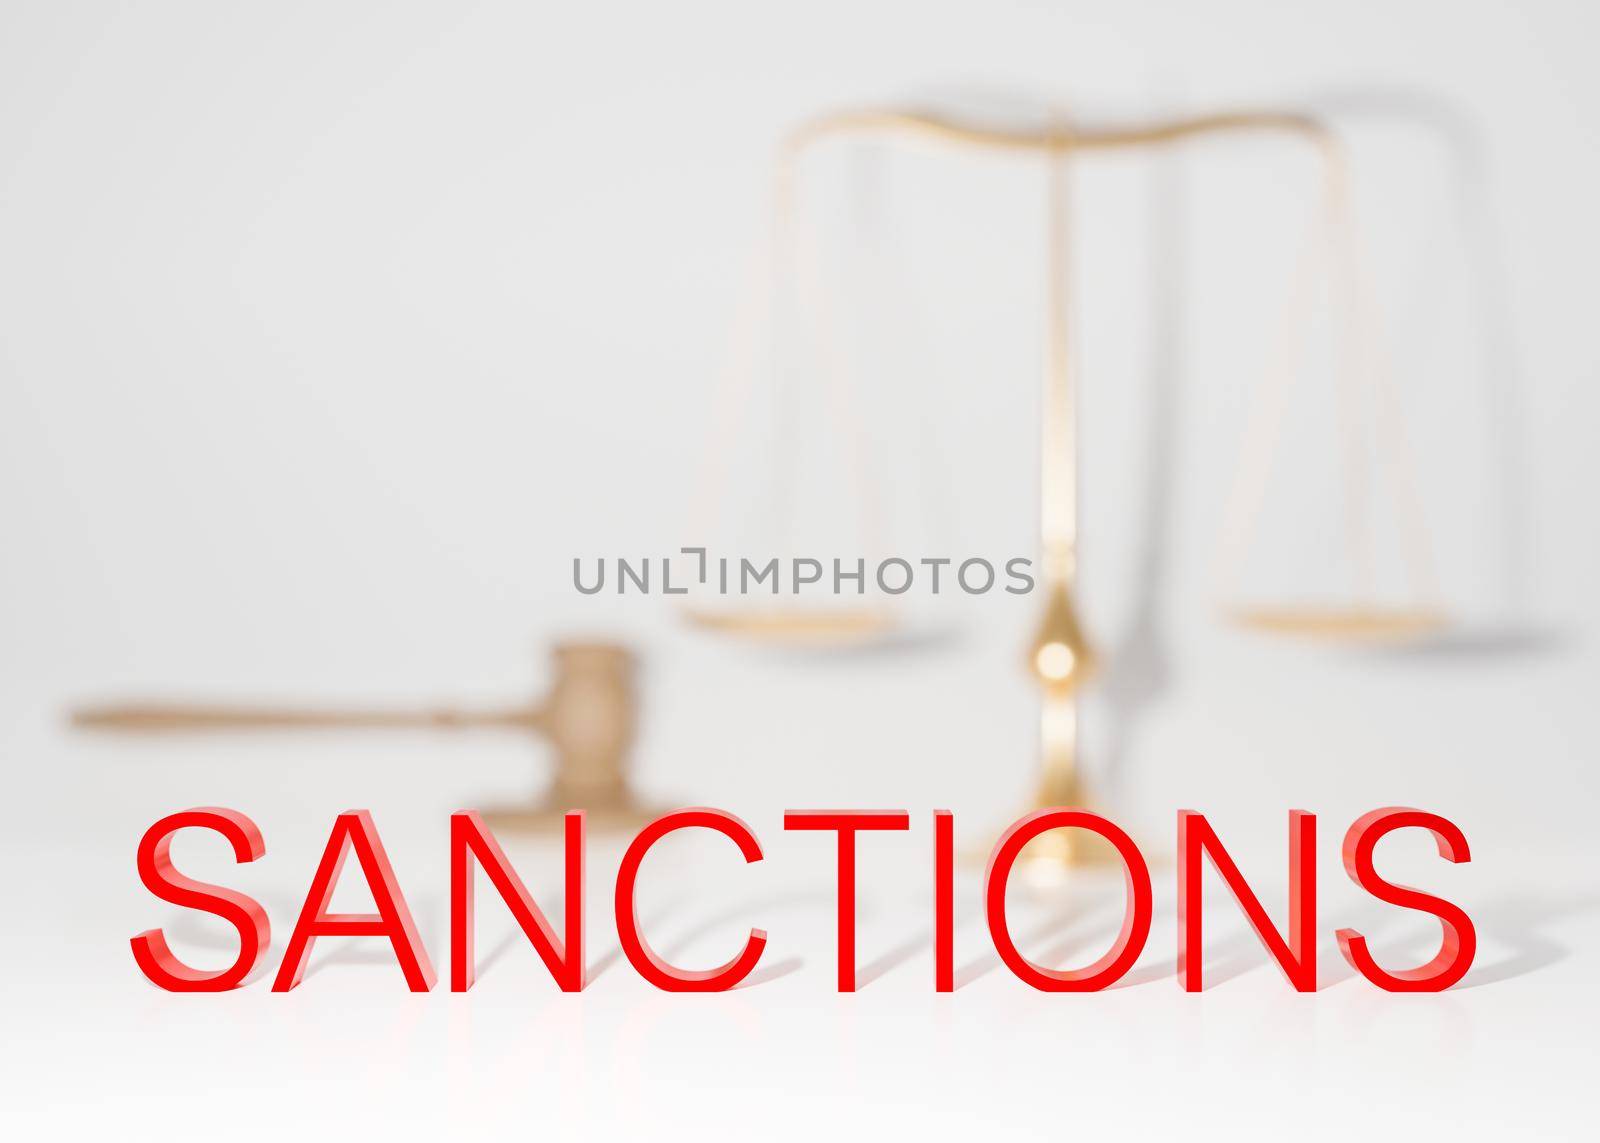 Text SANCTIONS on white background. Economic, financial, political sanctions. Russian oil and gas embargo. Russian Ukrainian conflict. Stop war, occupation. 3D rendering